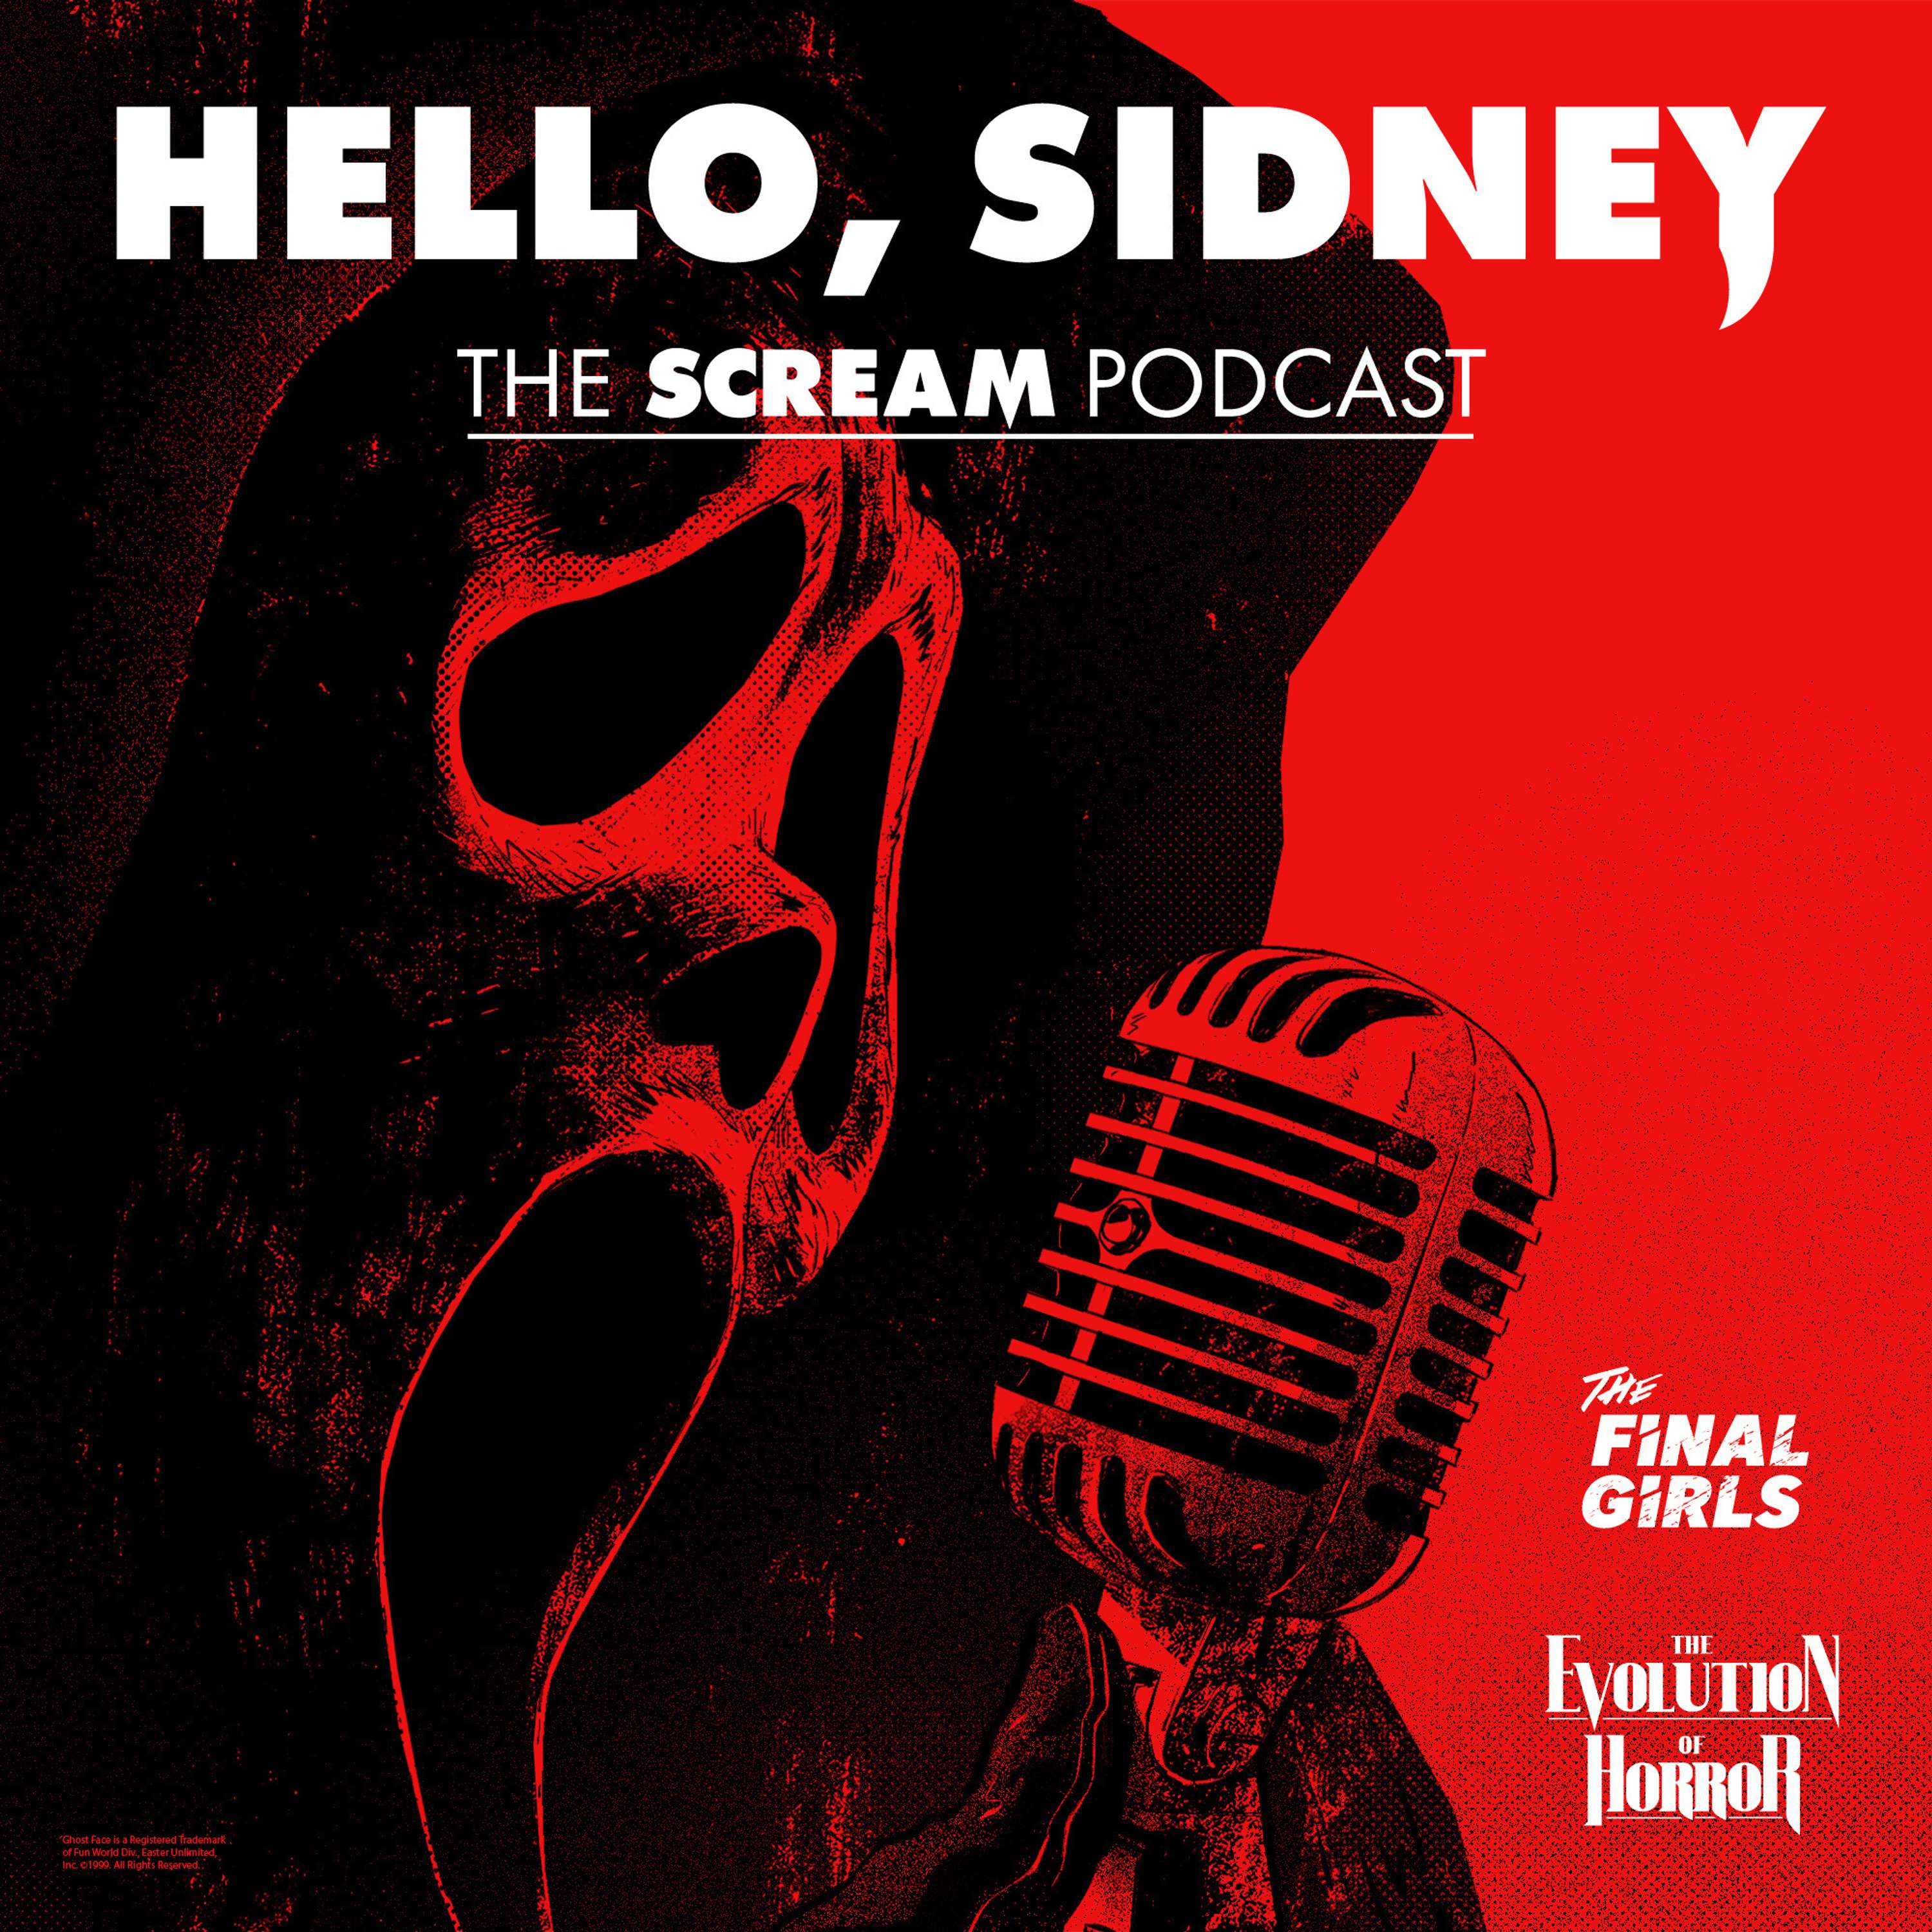 Introducing... Hello, Sidney: A Scream Podcast